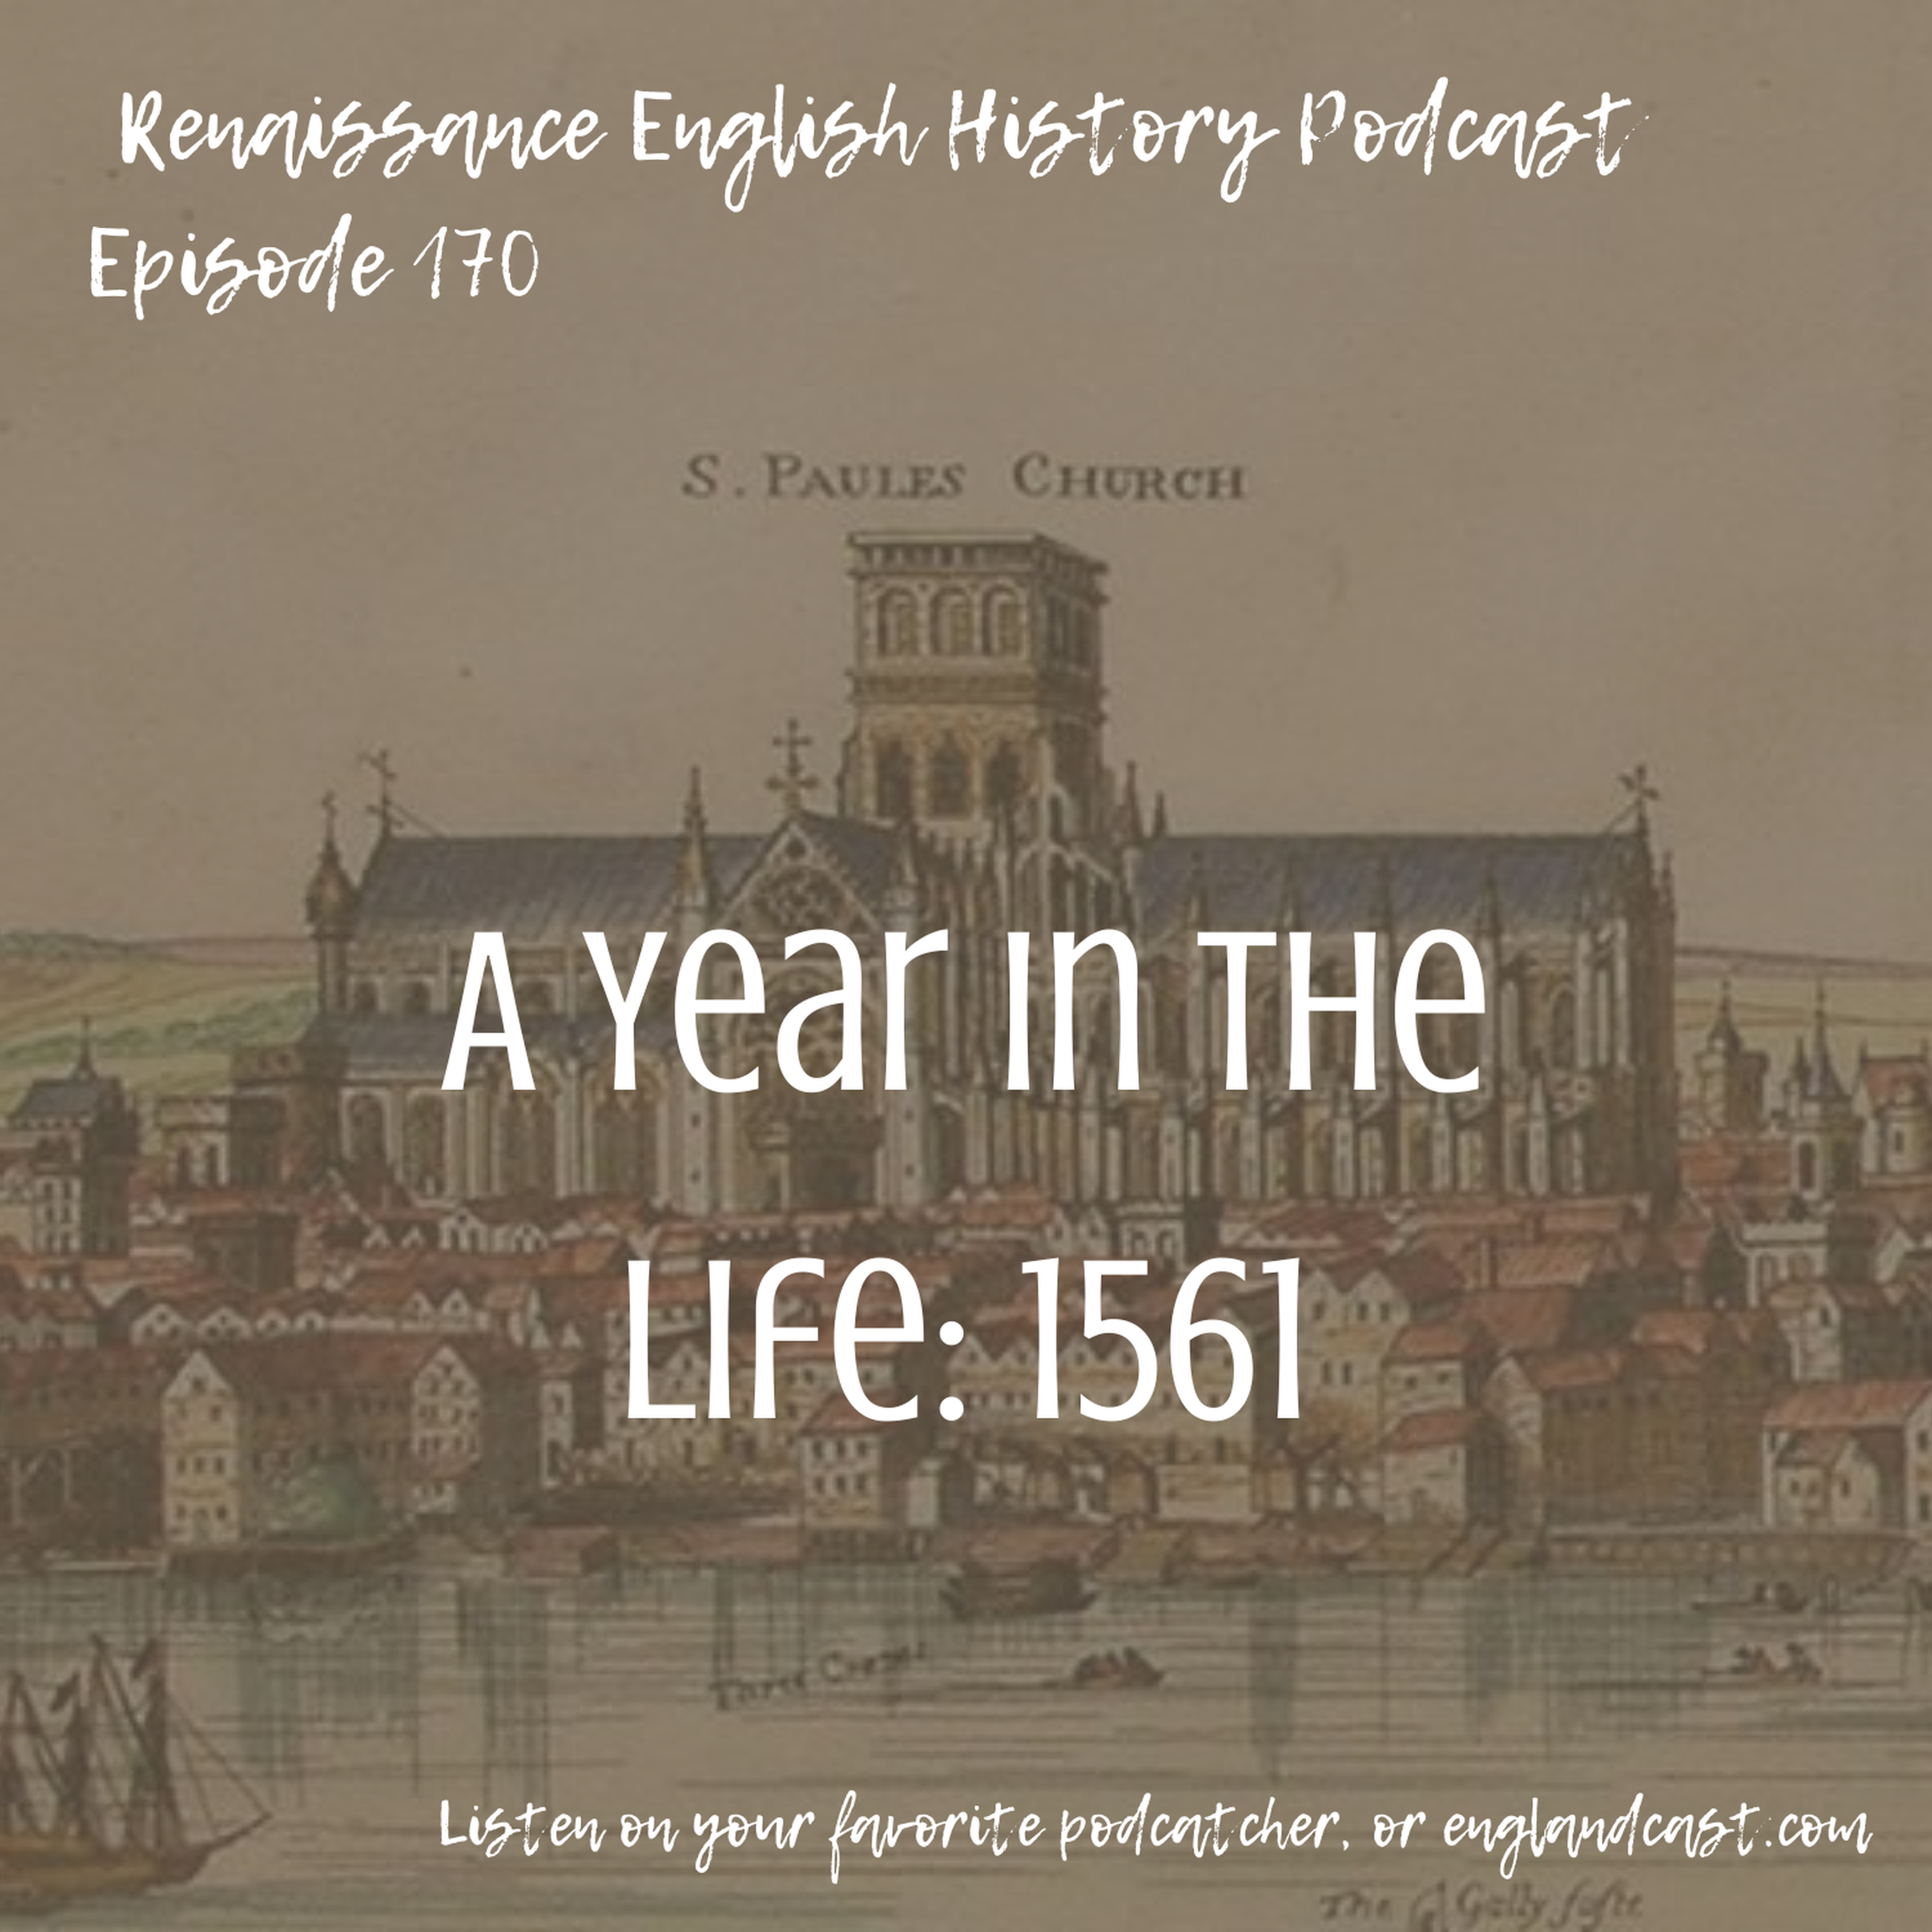 Episode 170: A Year in the Life - 1561